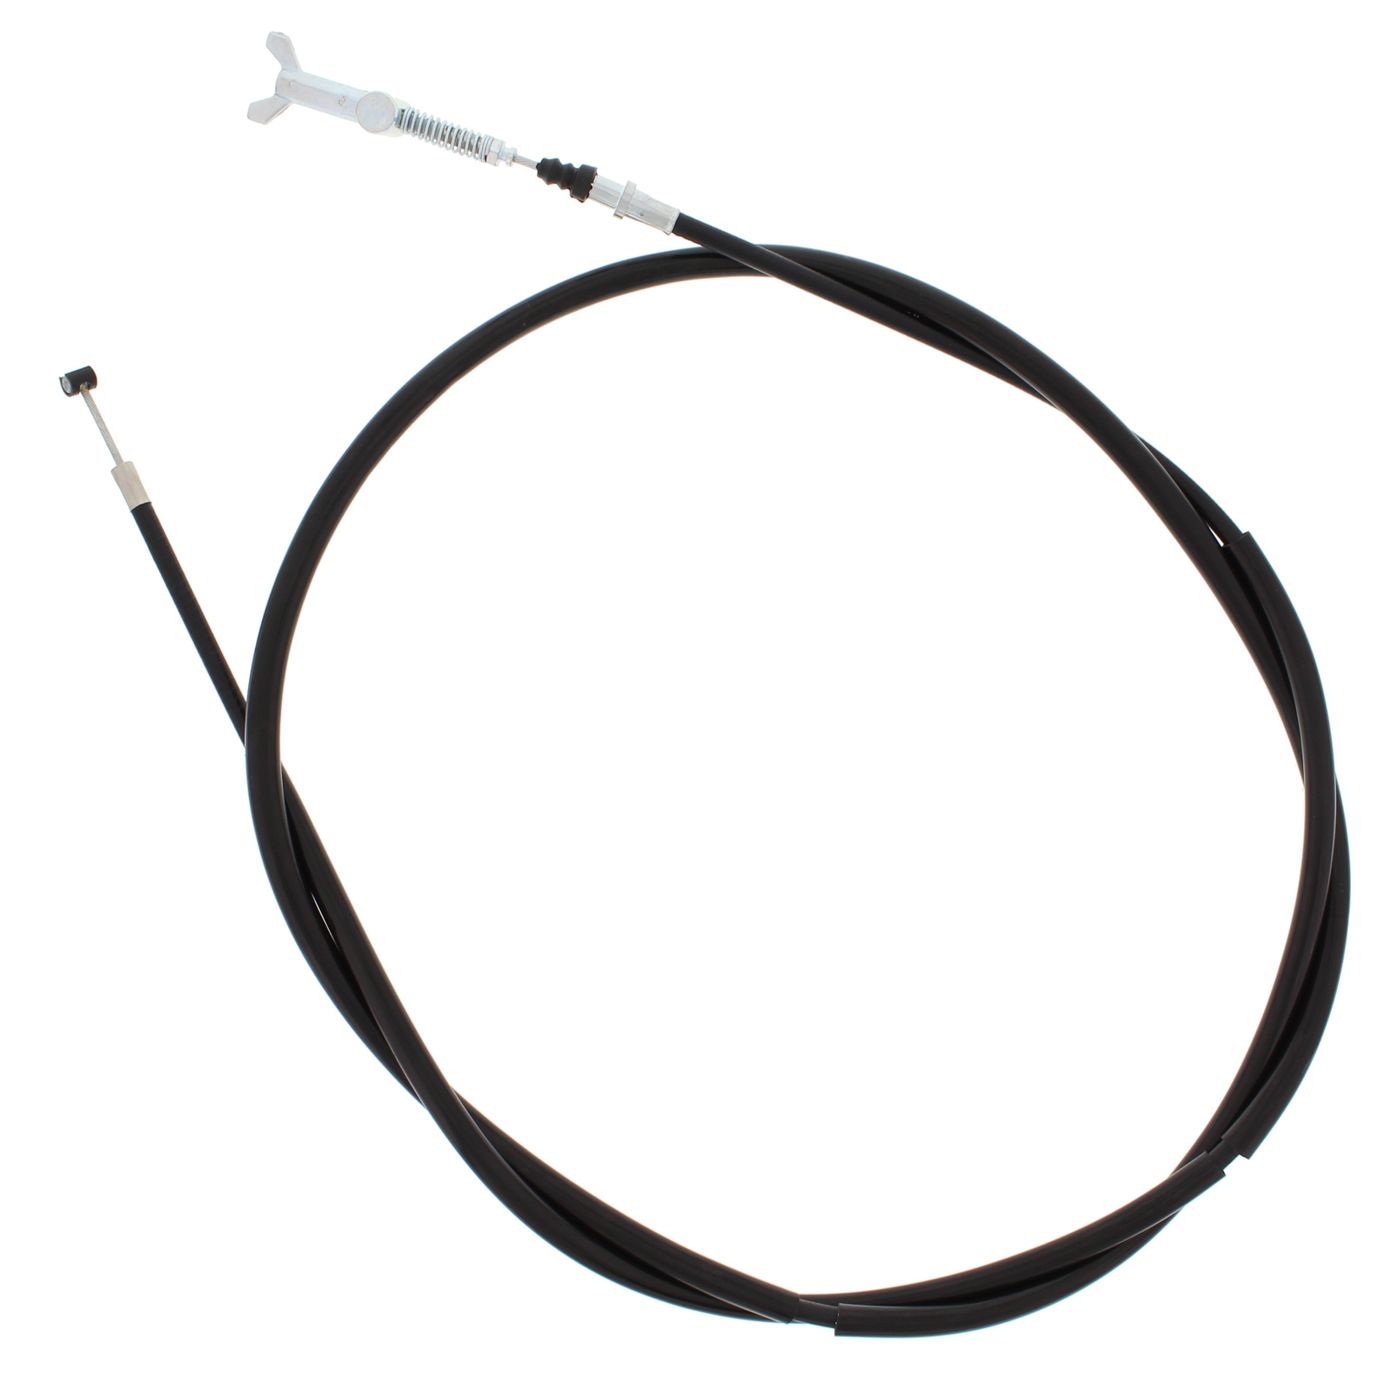 Wrp Brake Cables - WRP454060 image